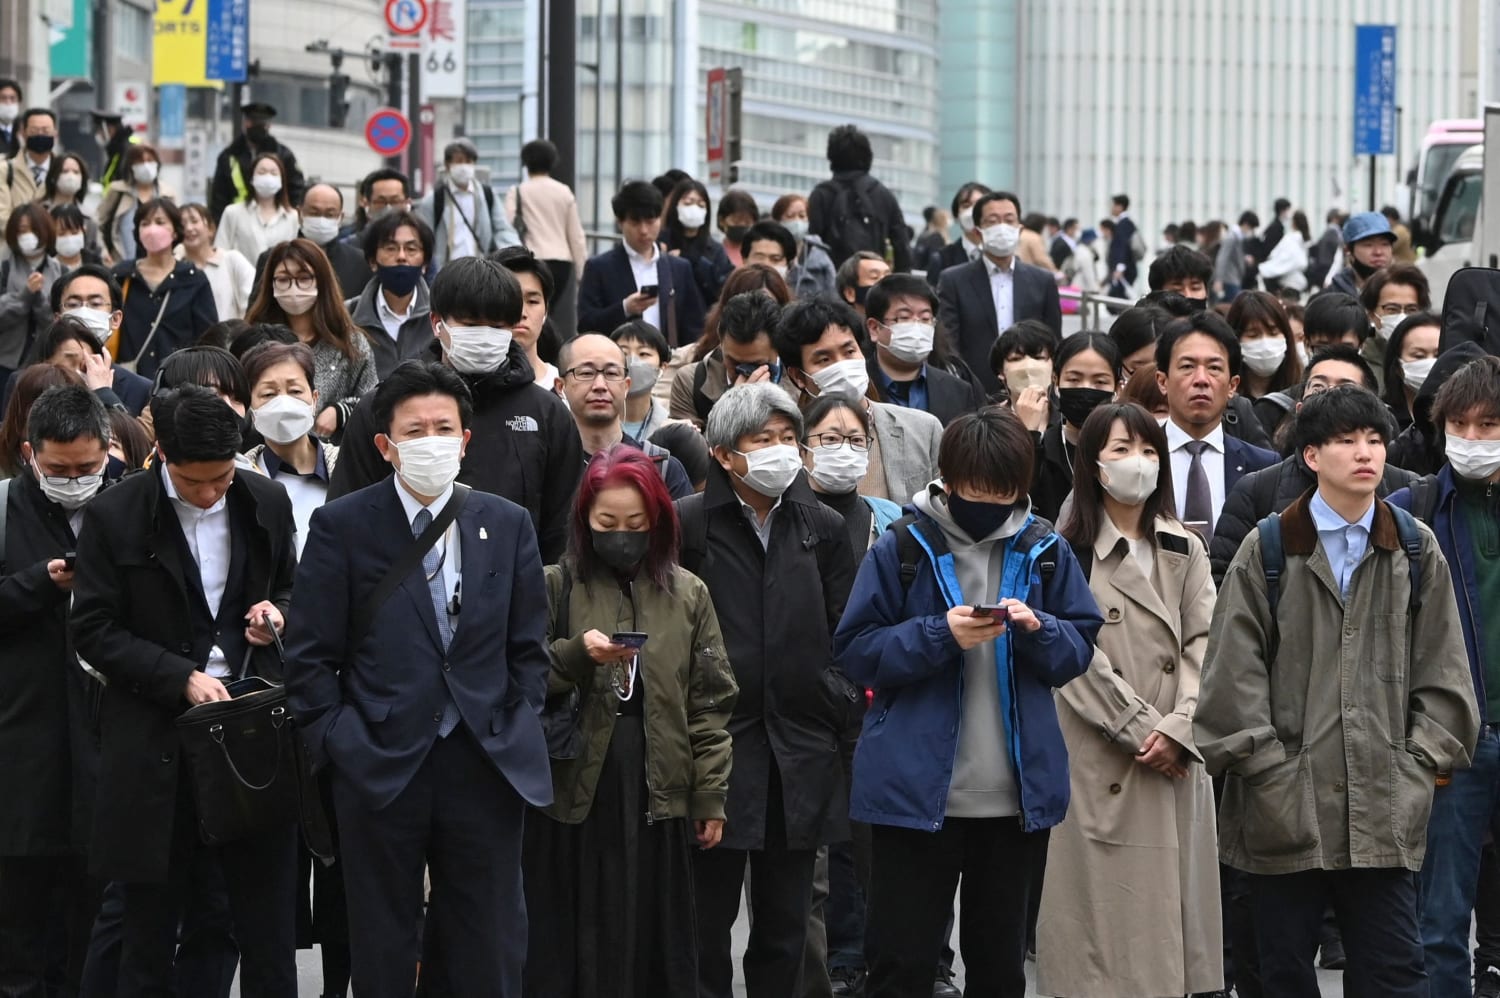 Masks in Japan even as 3-year request to wear them ends